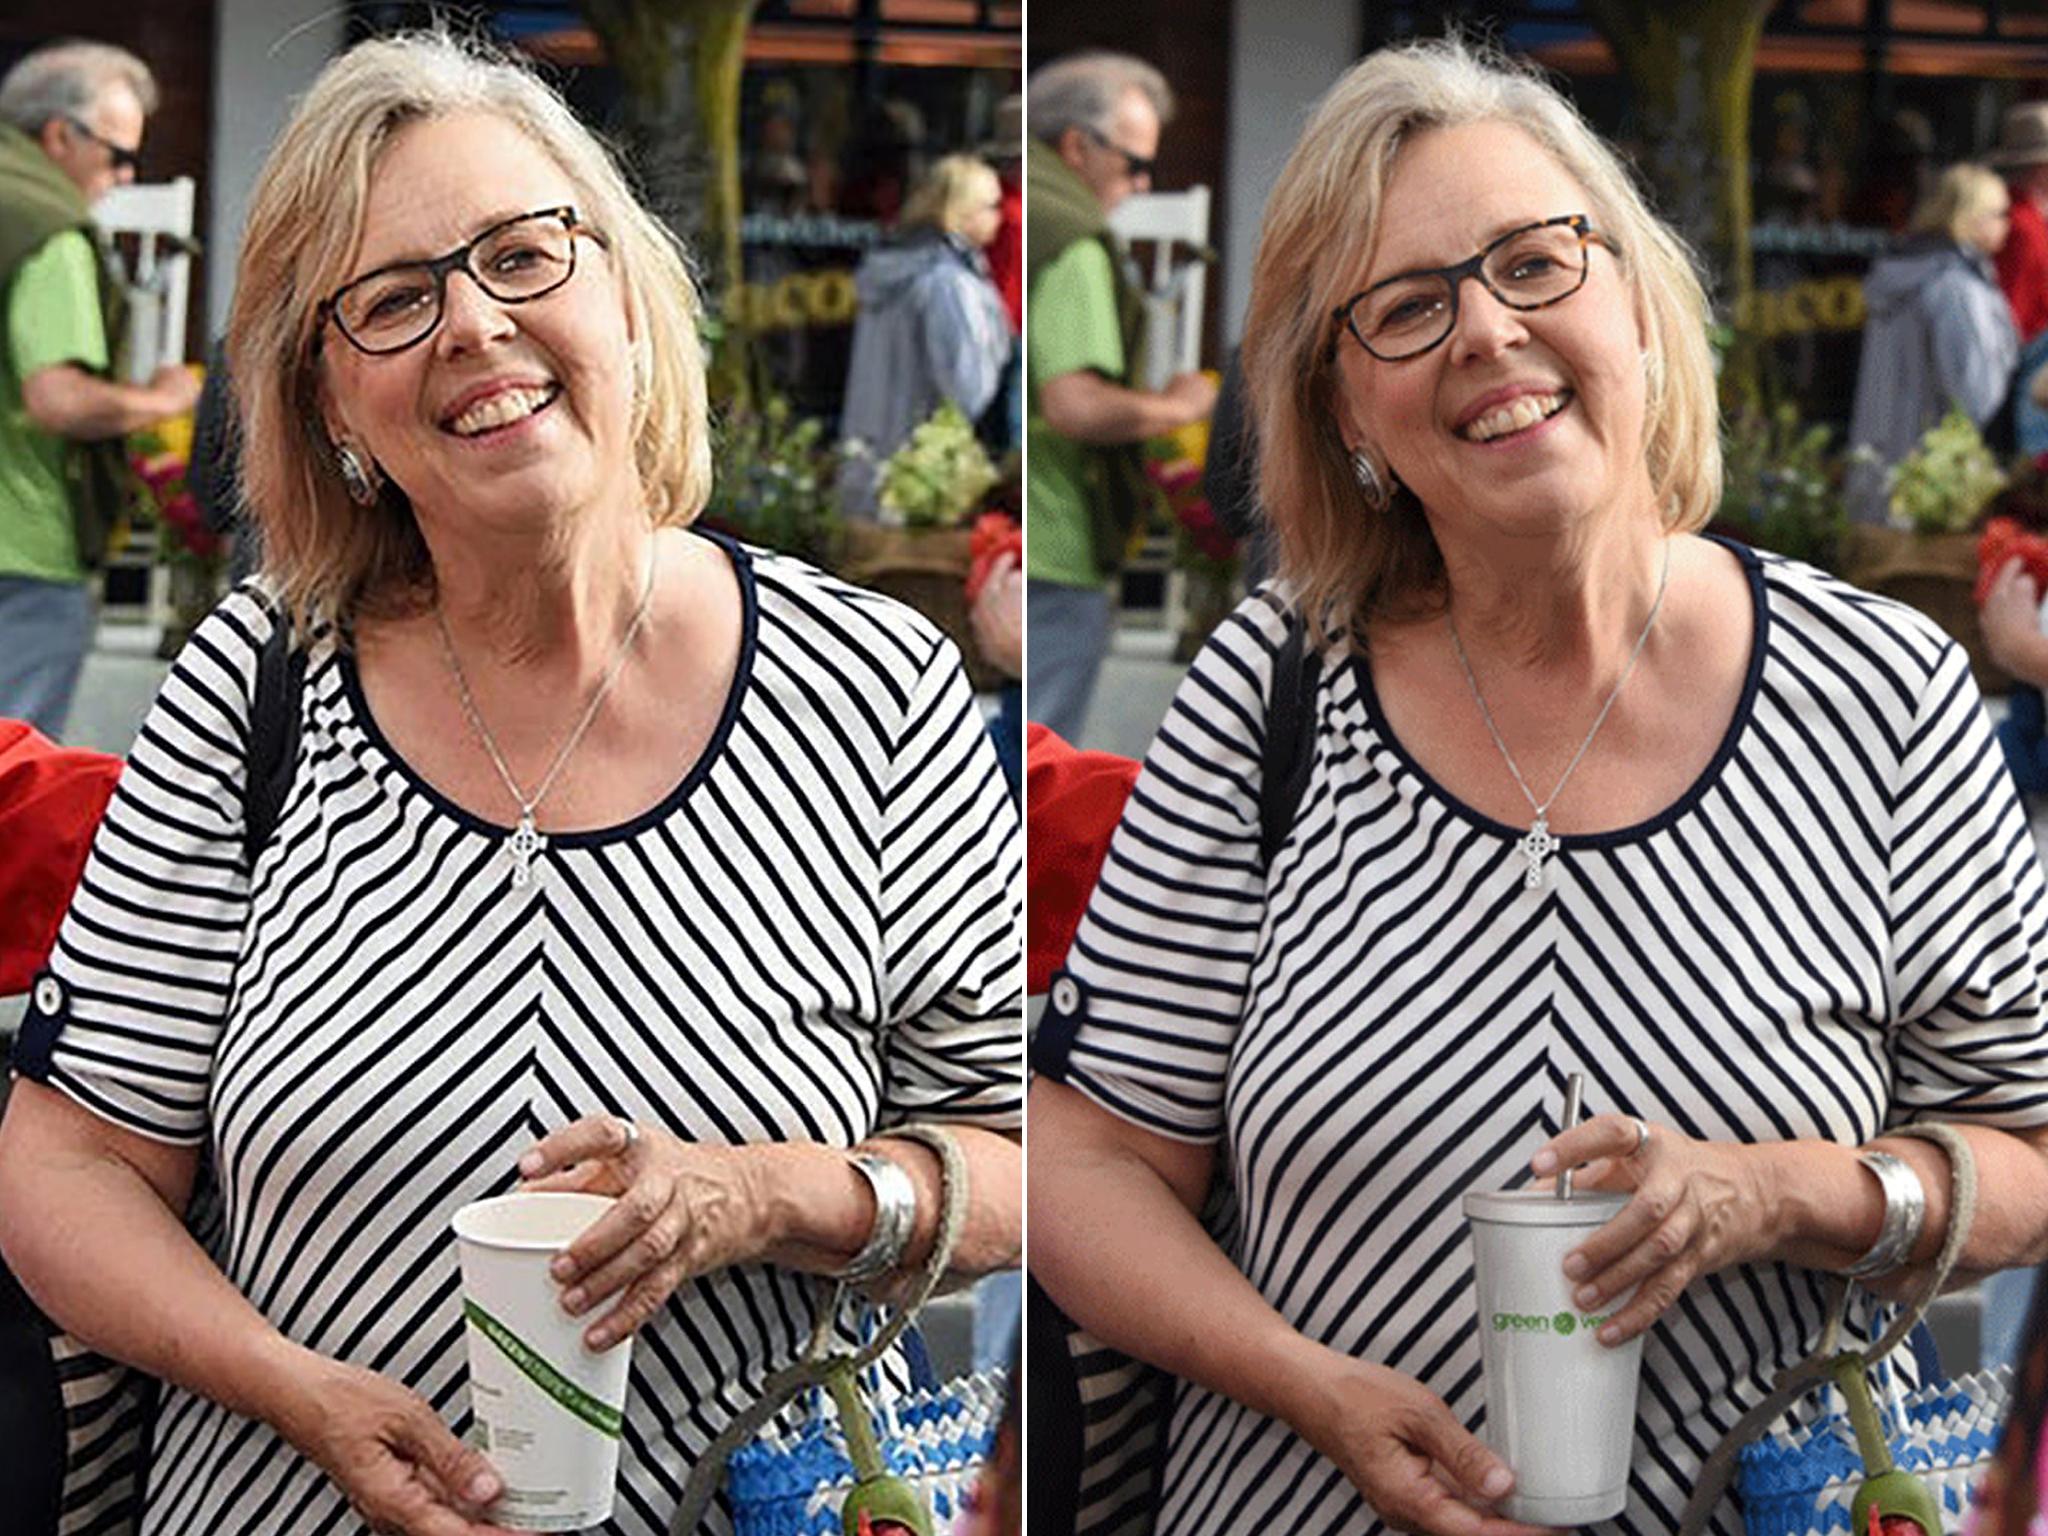 Staff for Green Party leader Elizabeth May altered a photo to show her holding a reusable cup.